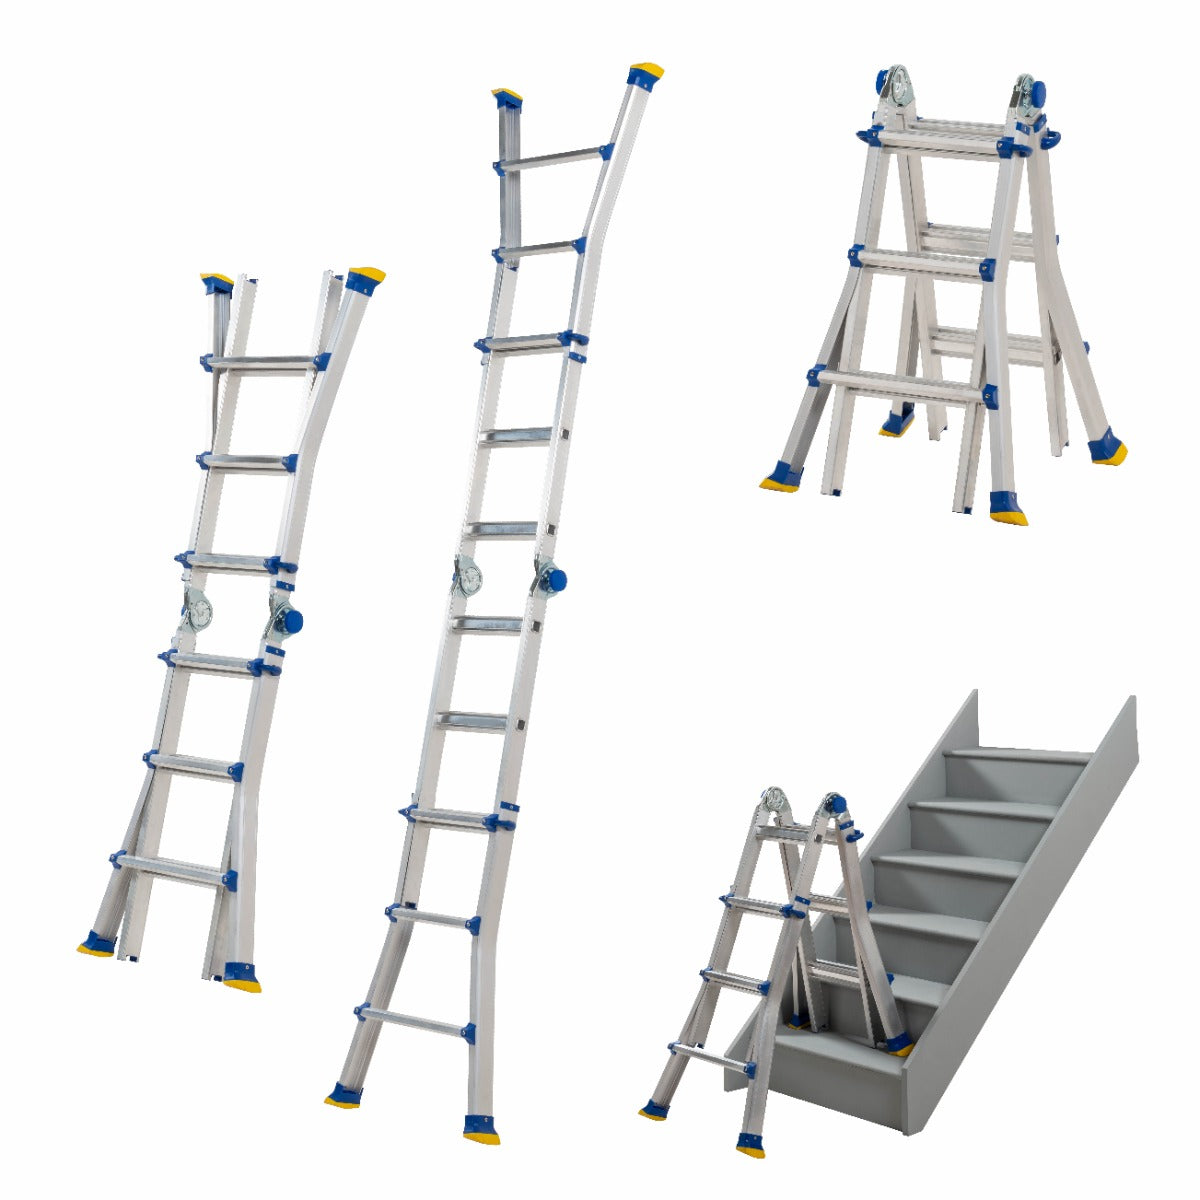 Werner Combination Ladder - All combinations